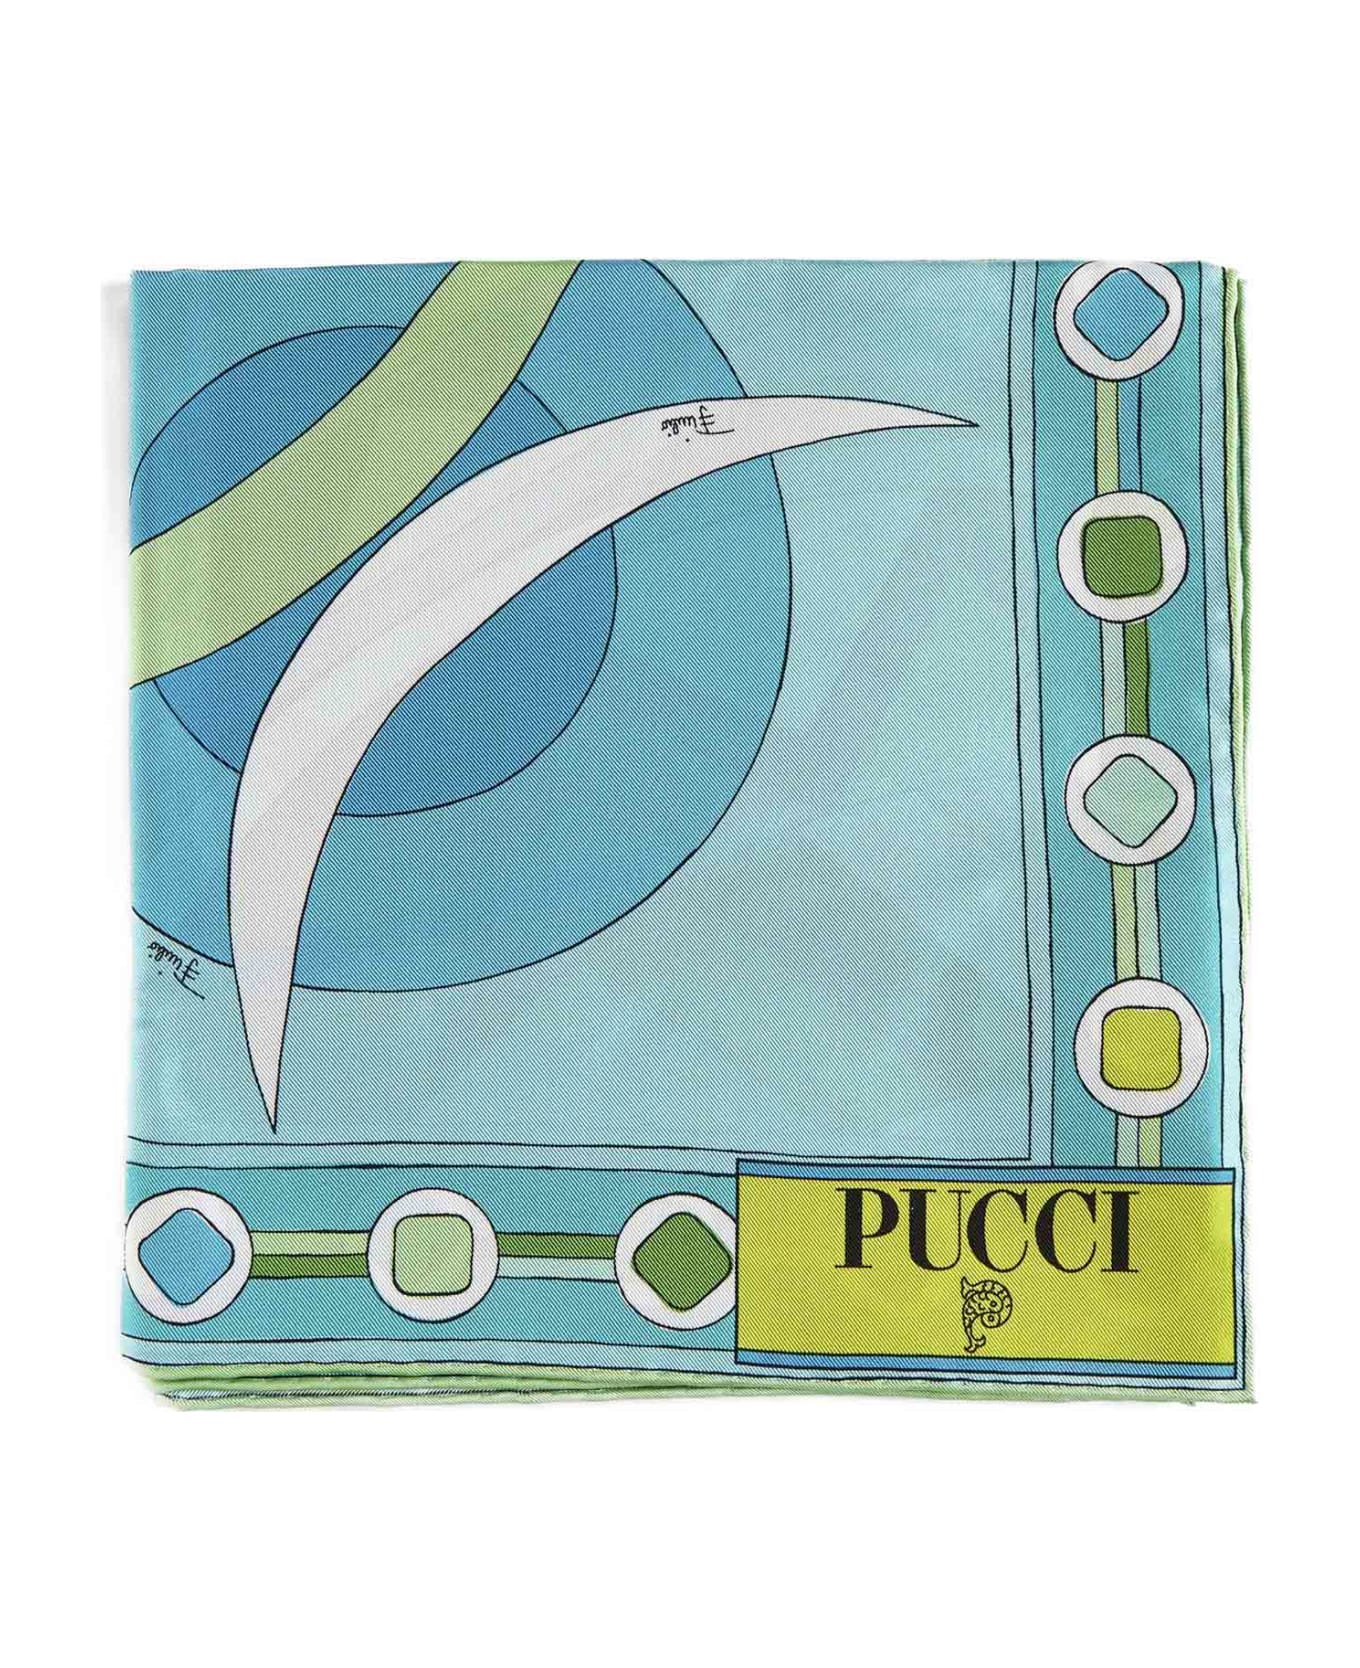 Pucci Scarf - Turchese lime